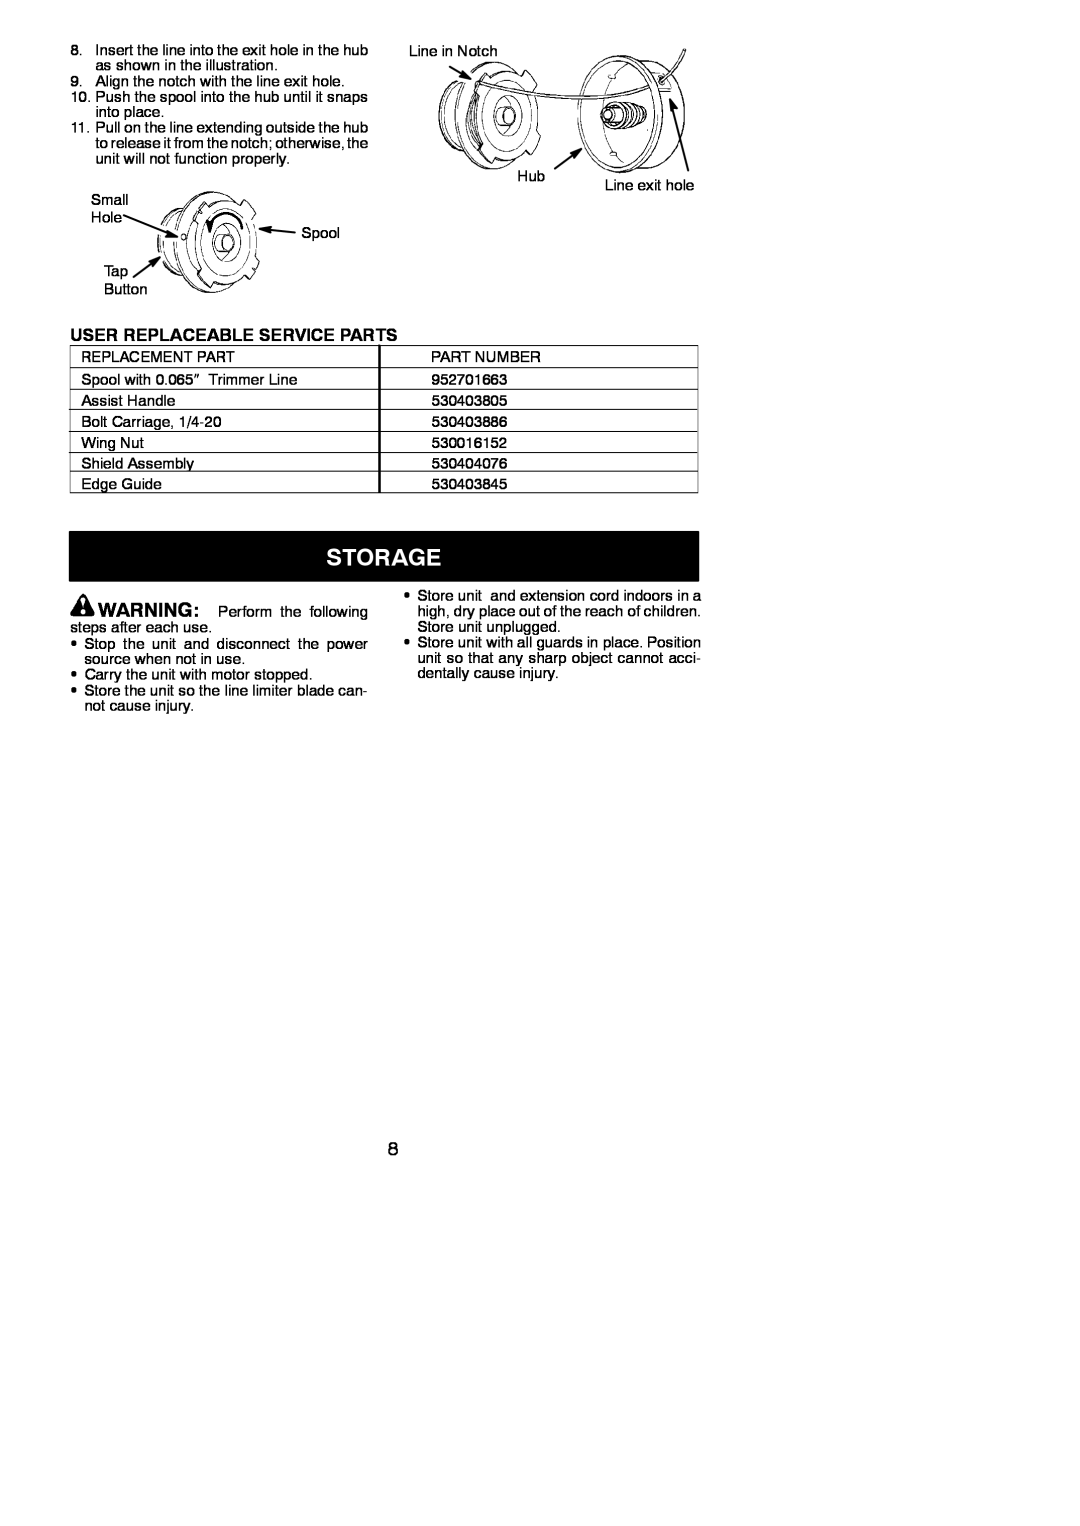 Weed Eater 545186762 instruction manual Storage, User Replaceable Service Parts 